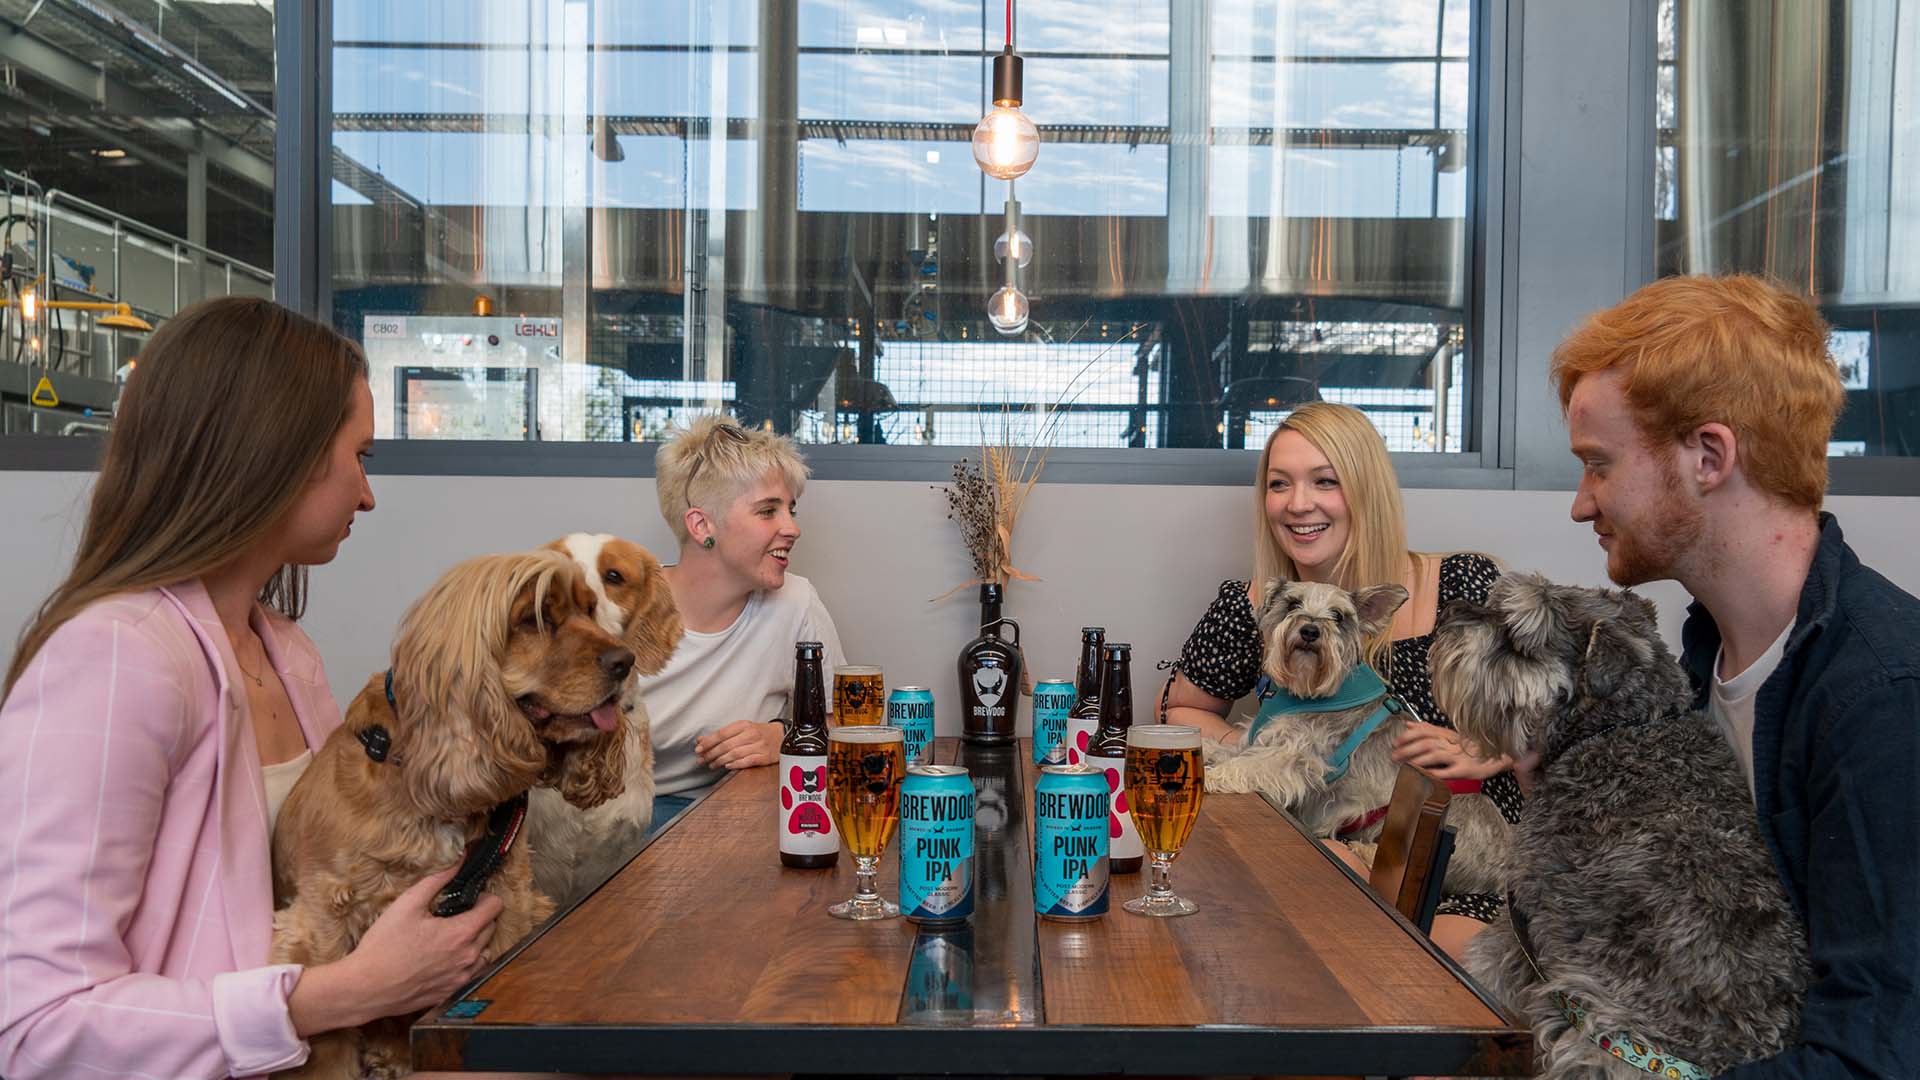 BrewDog Is Giving Away 'Dogkeeper' Packages to Dog-Loving Beer Drinkers and Their Pooches